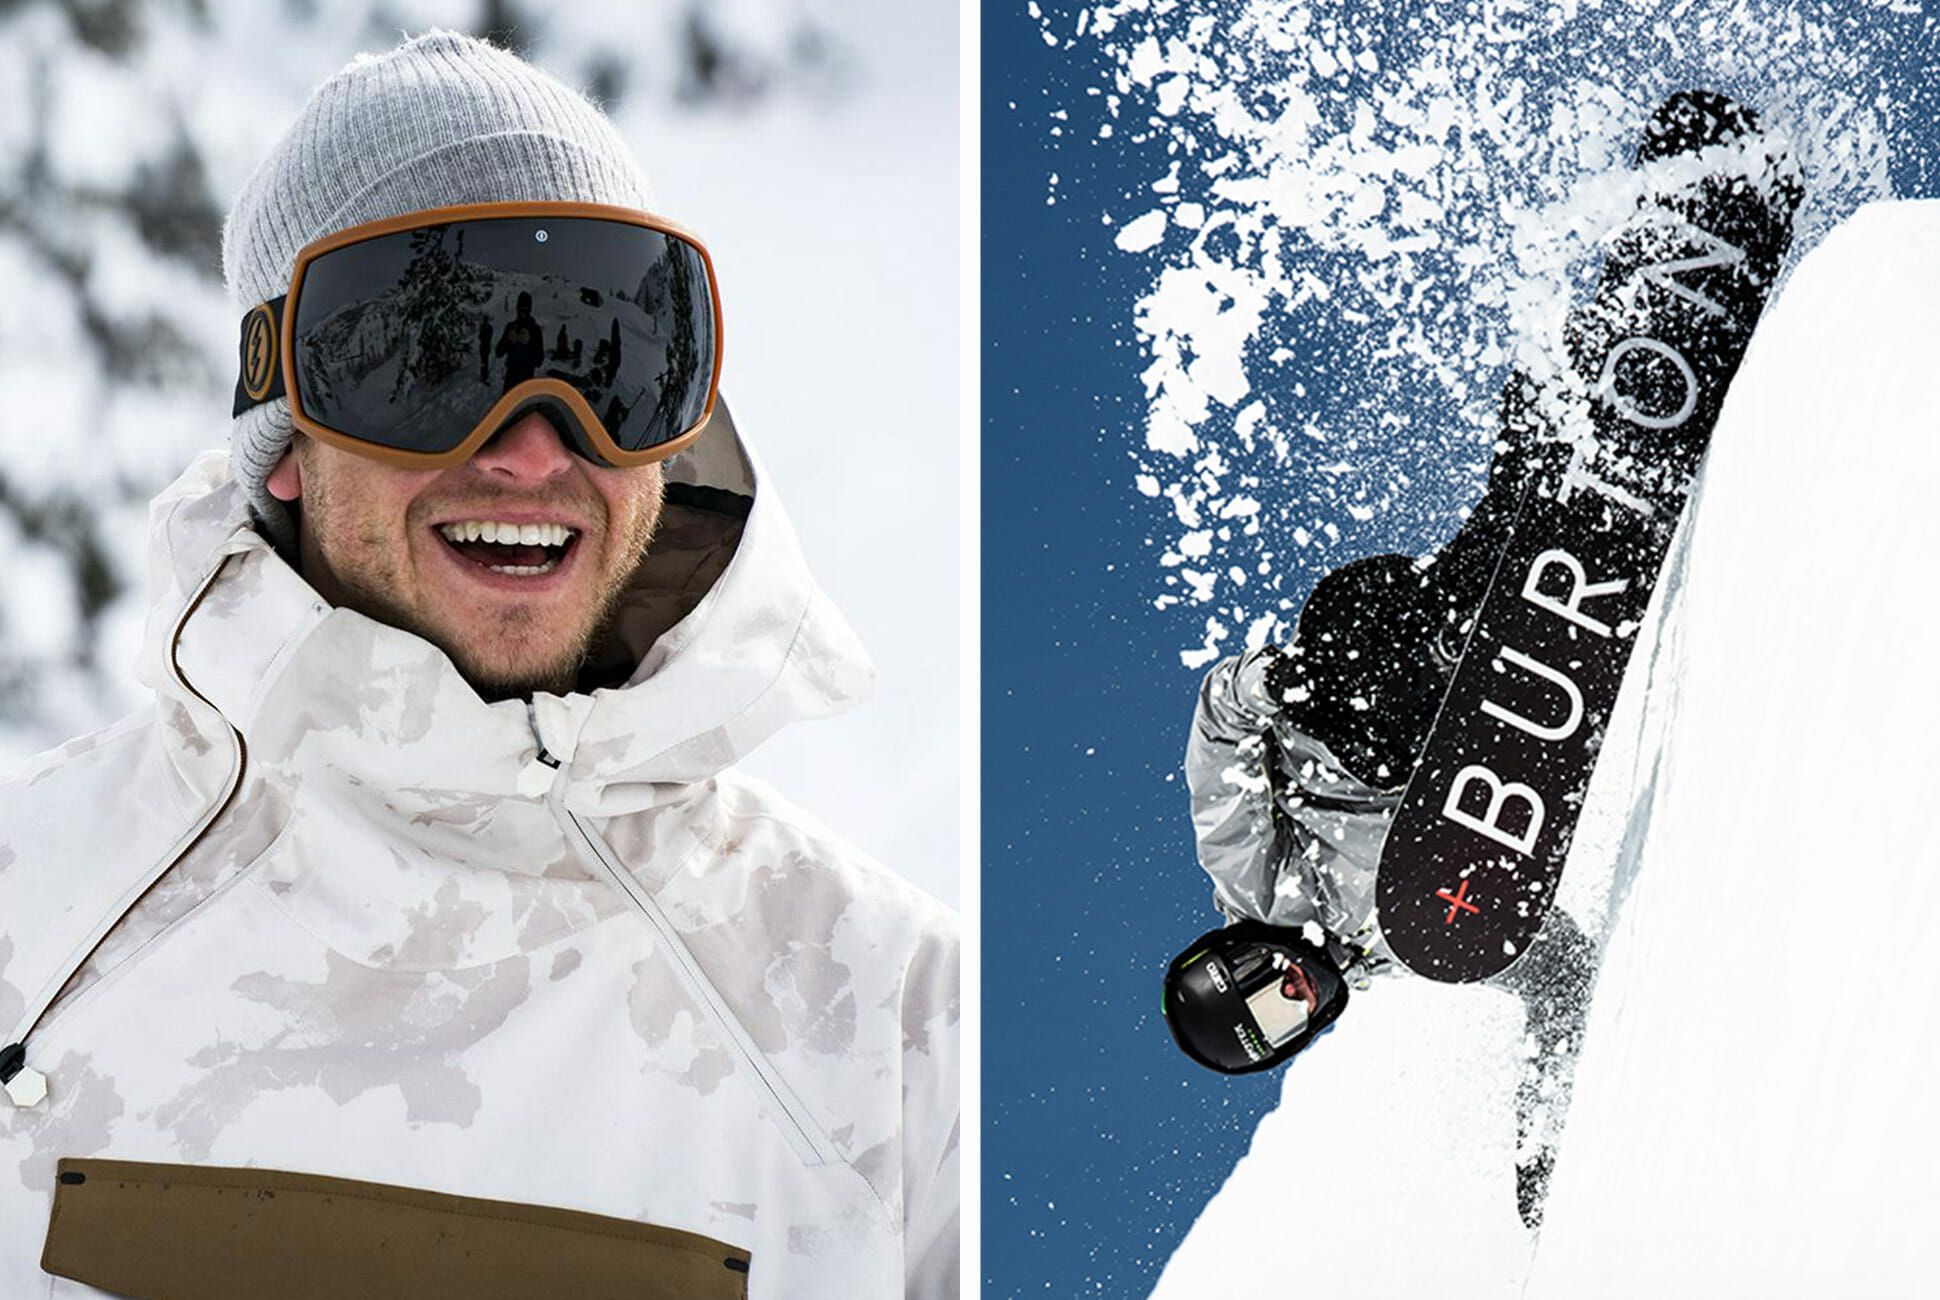 best oakley goggles for snowboarding